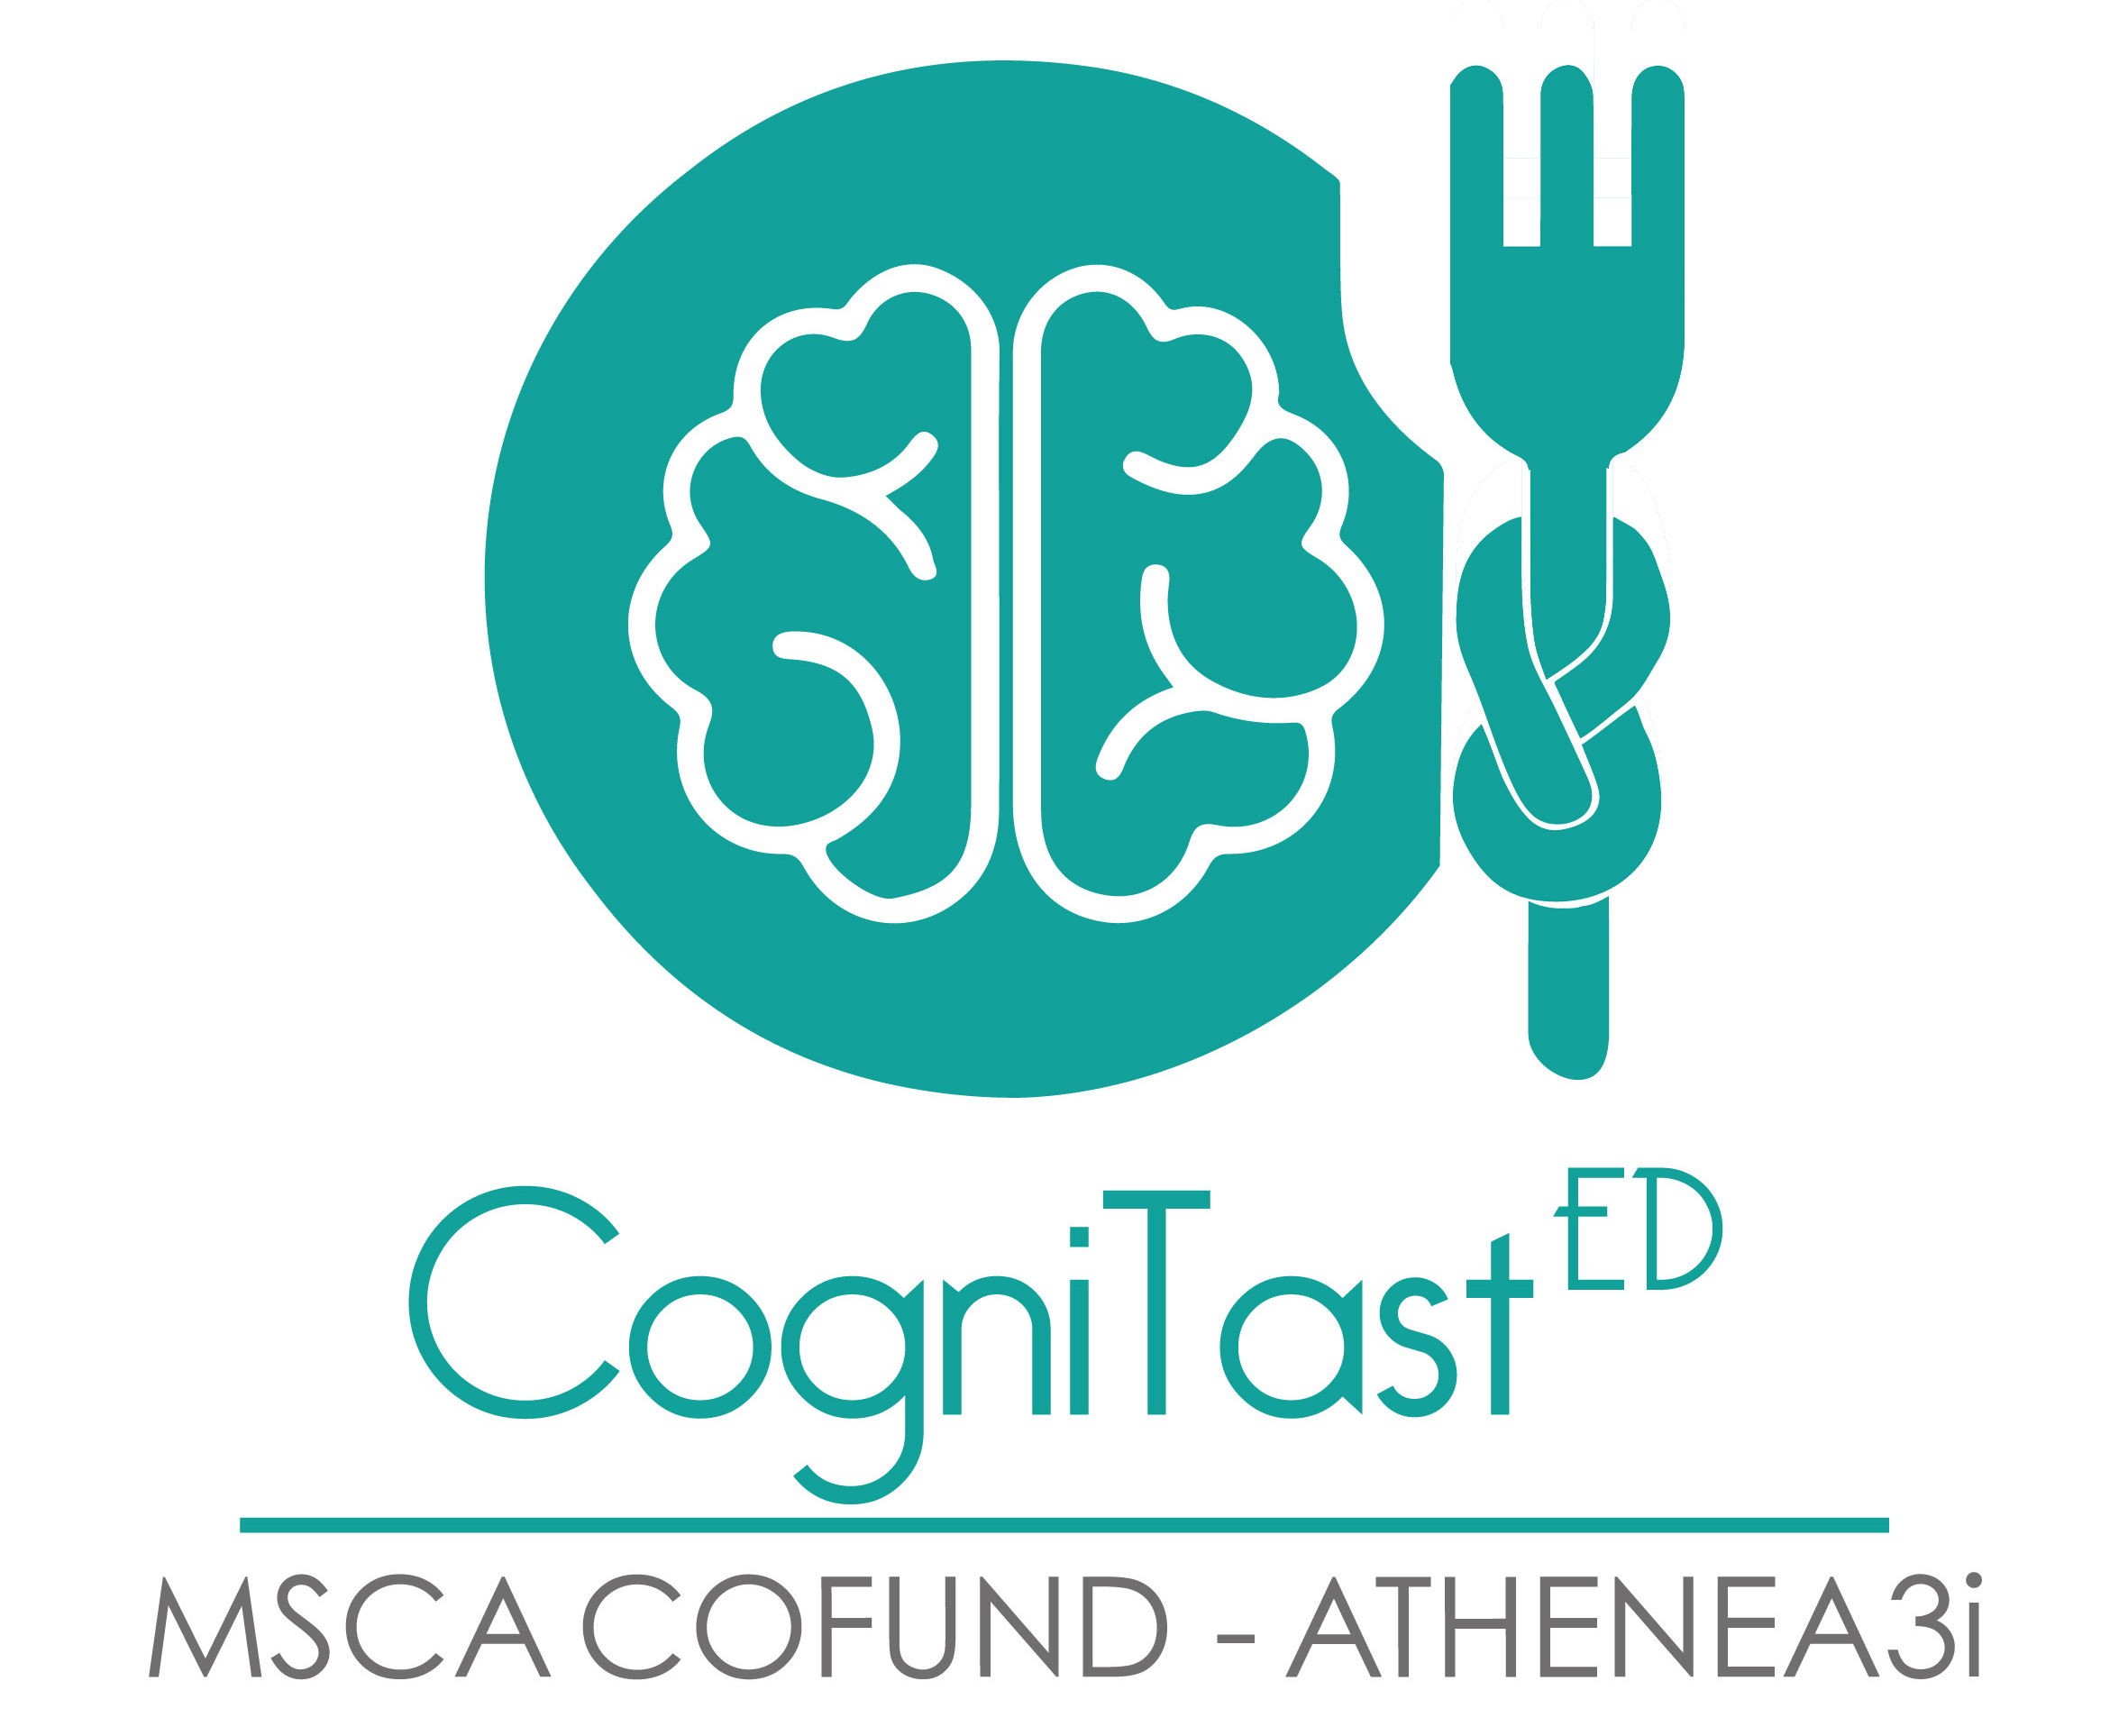 The Cognitasted project logo